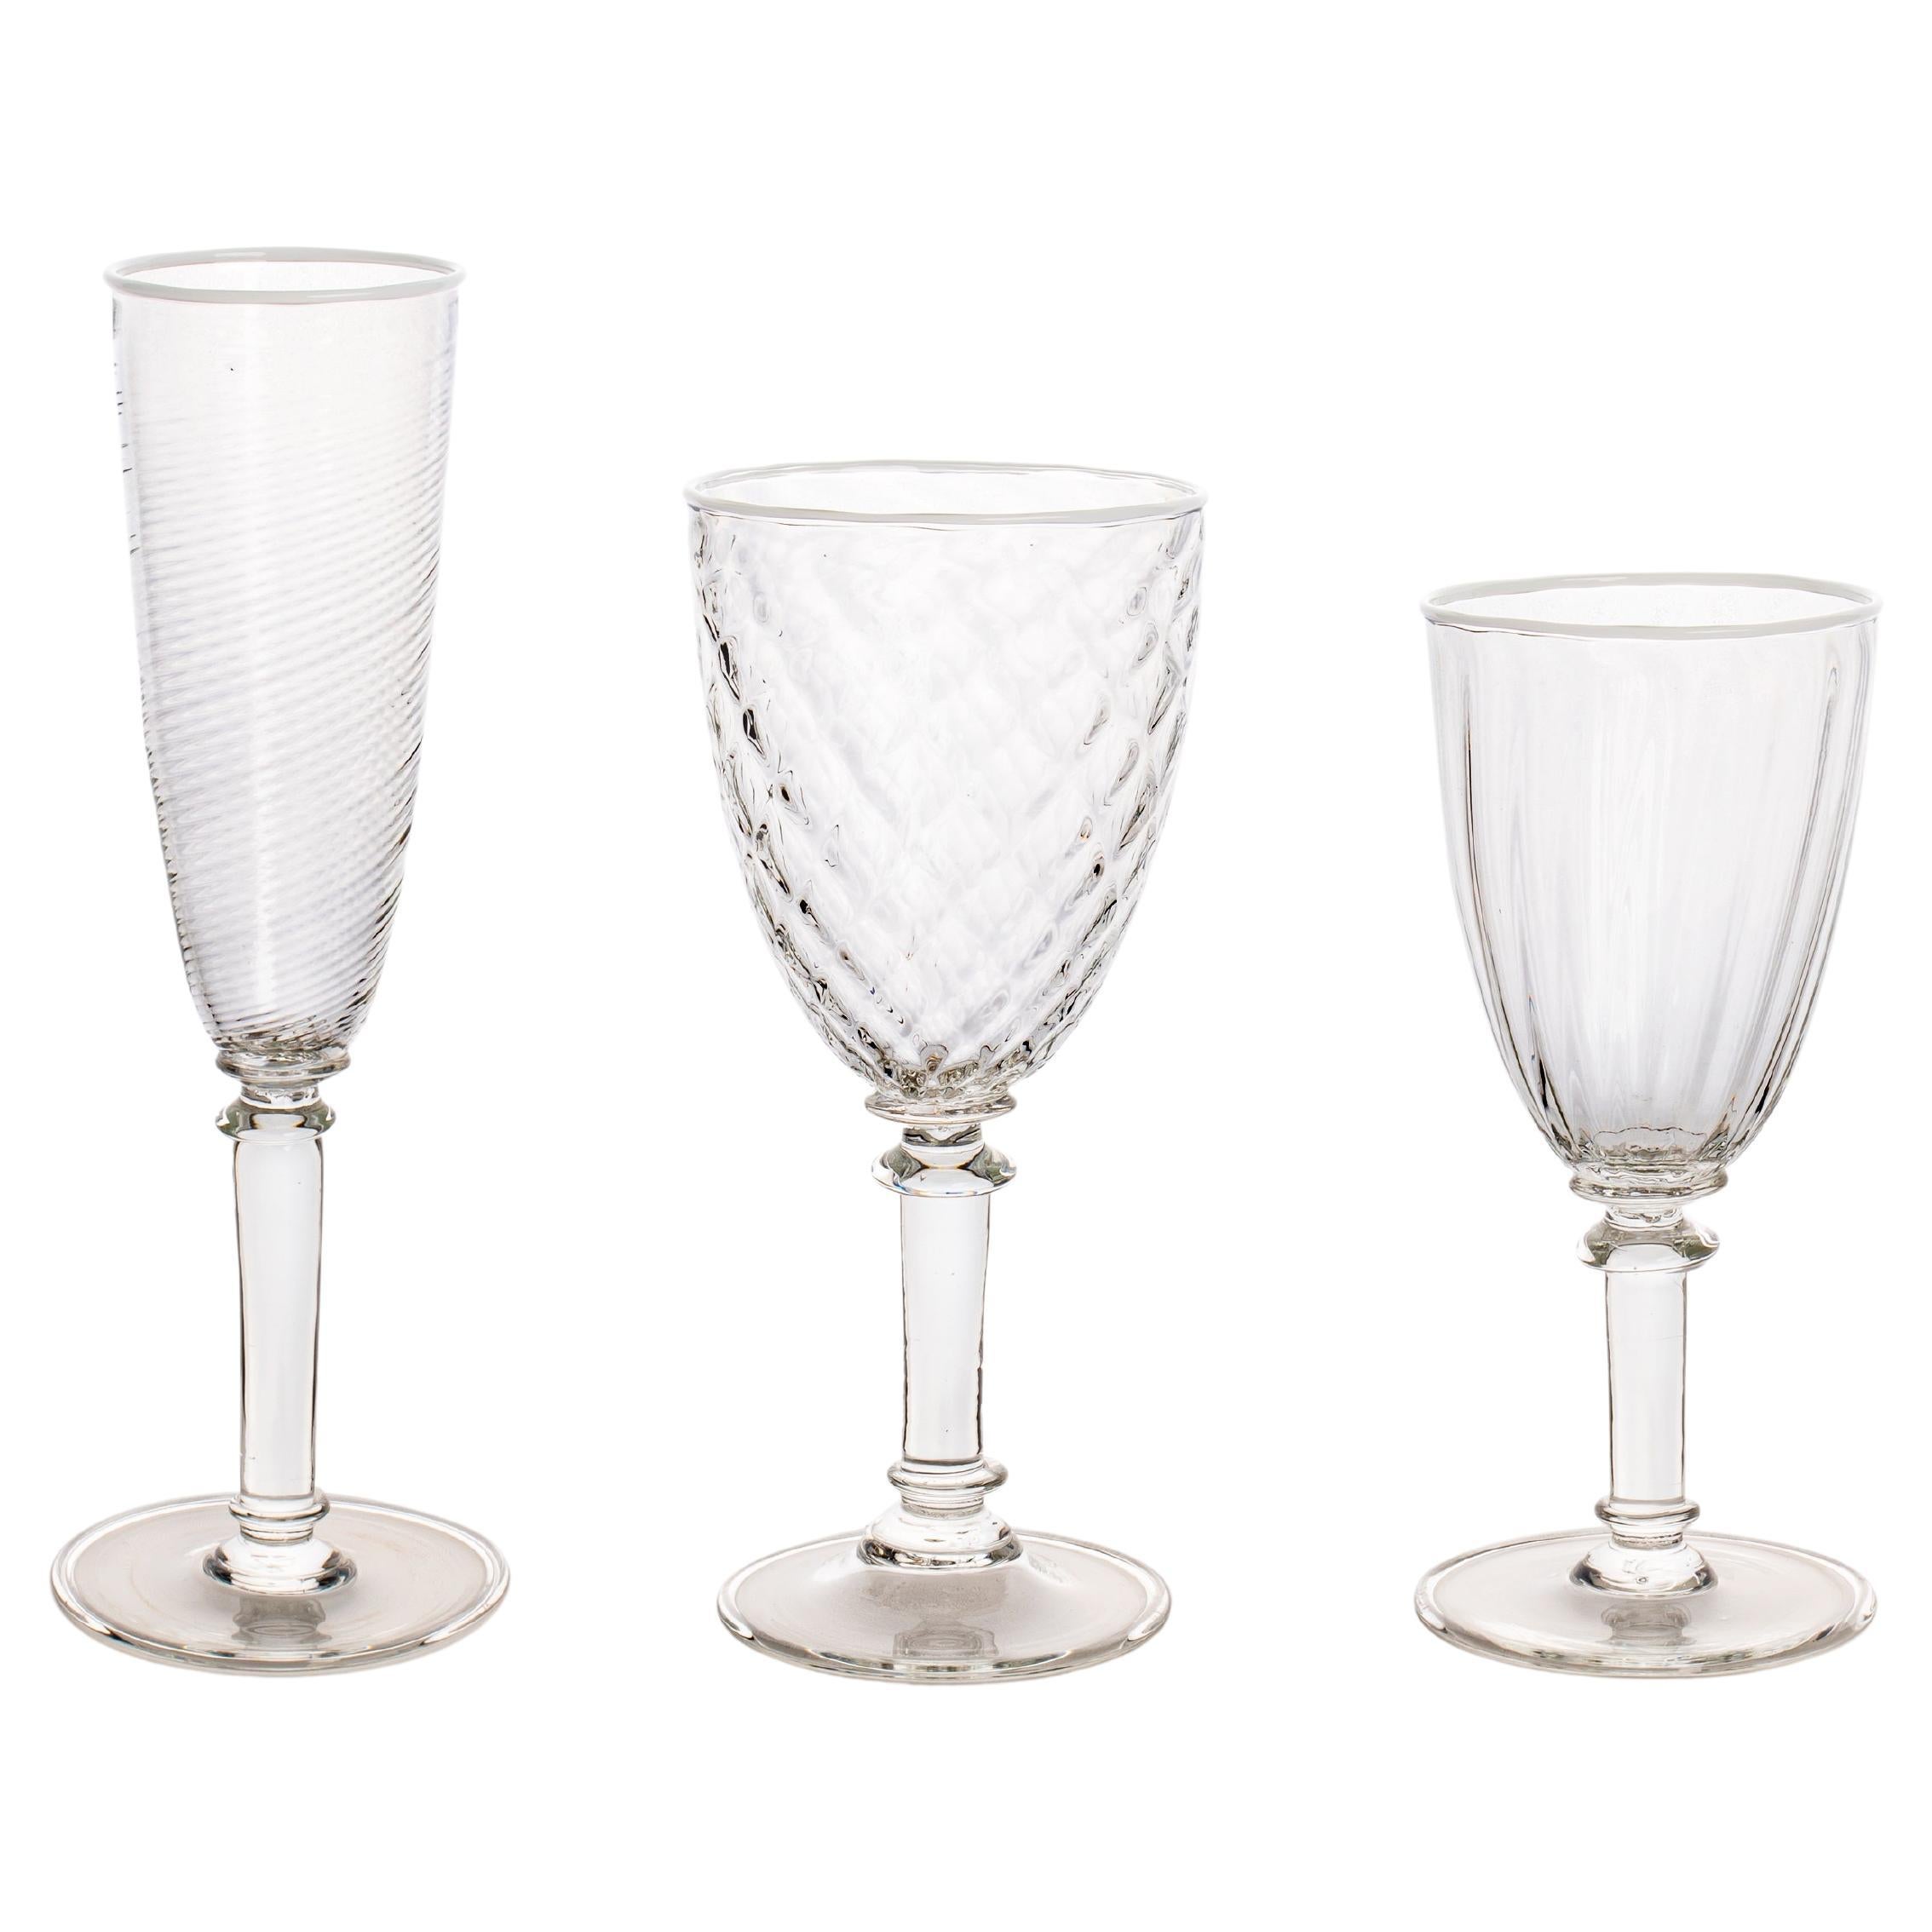 Murano Glass Ultralight Set of 3 Mixed-Texture Goblets with White Rim